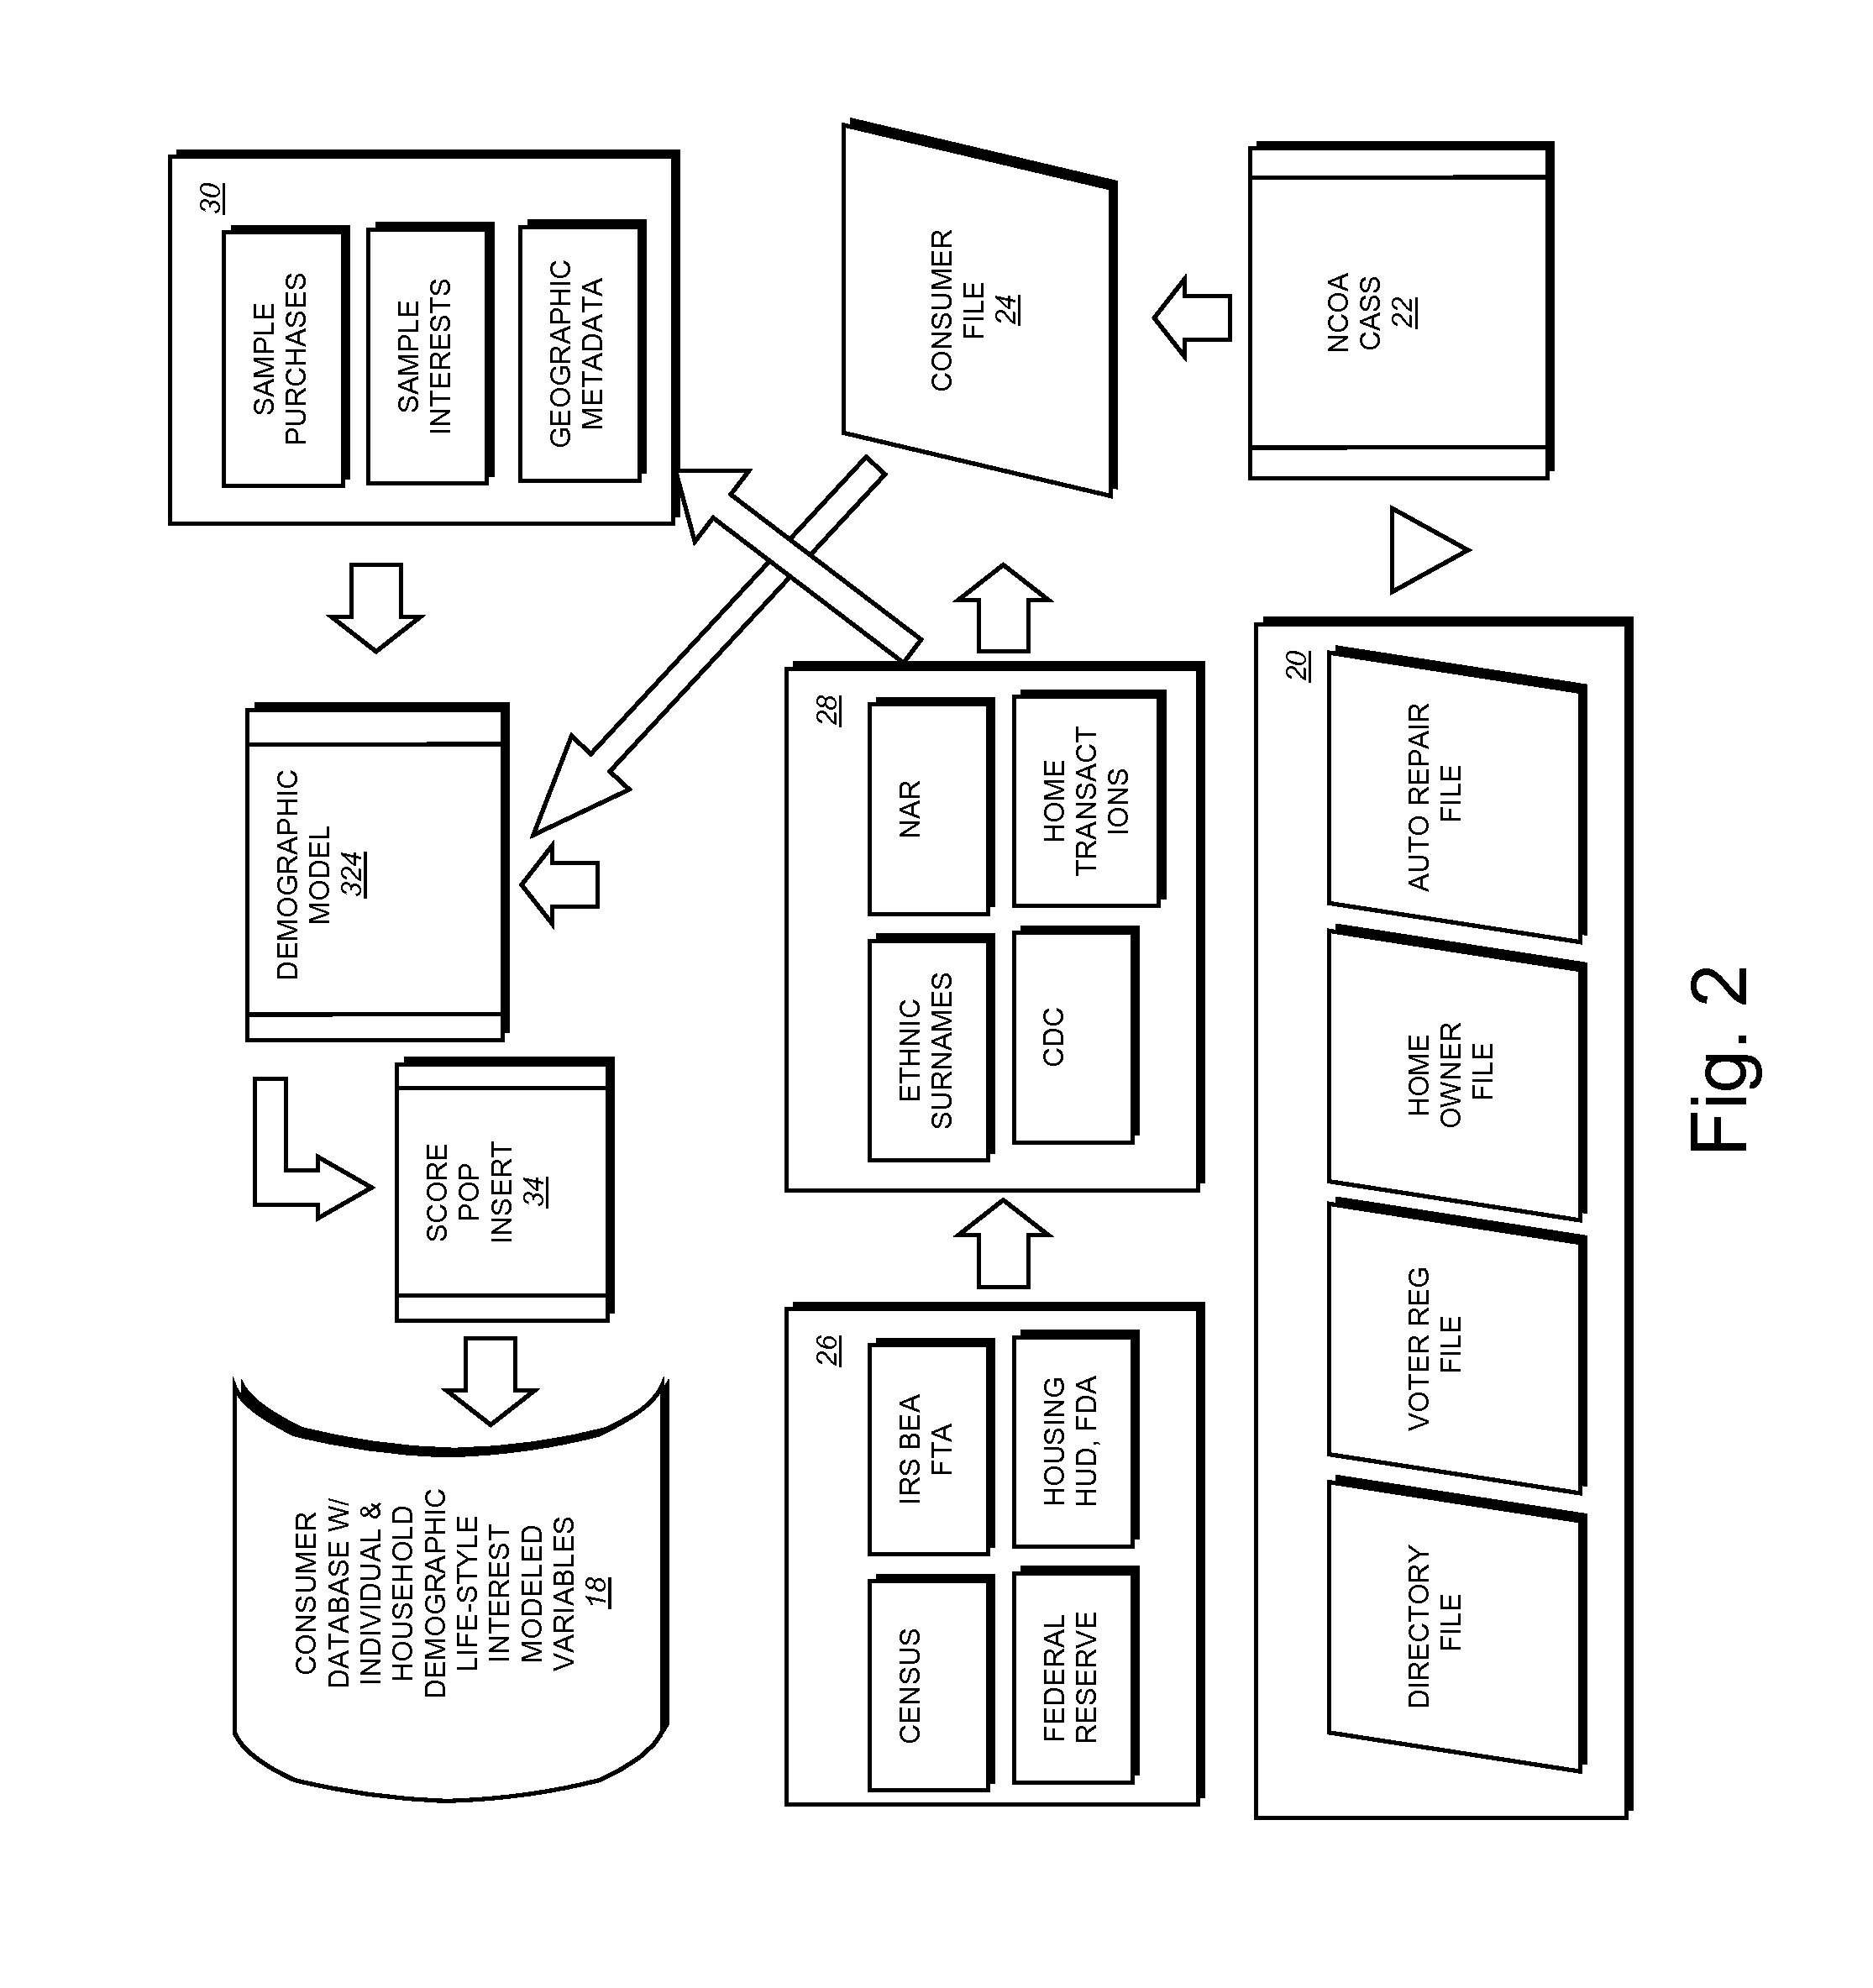 System and method for creating customized IP zones utilizing predictive modeling